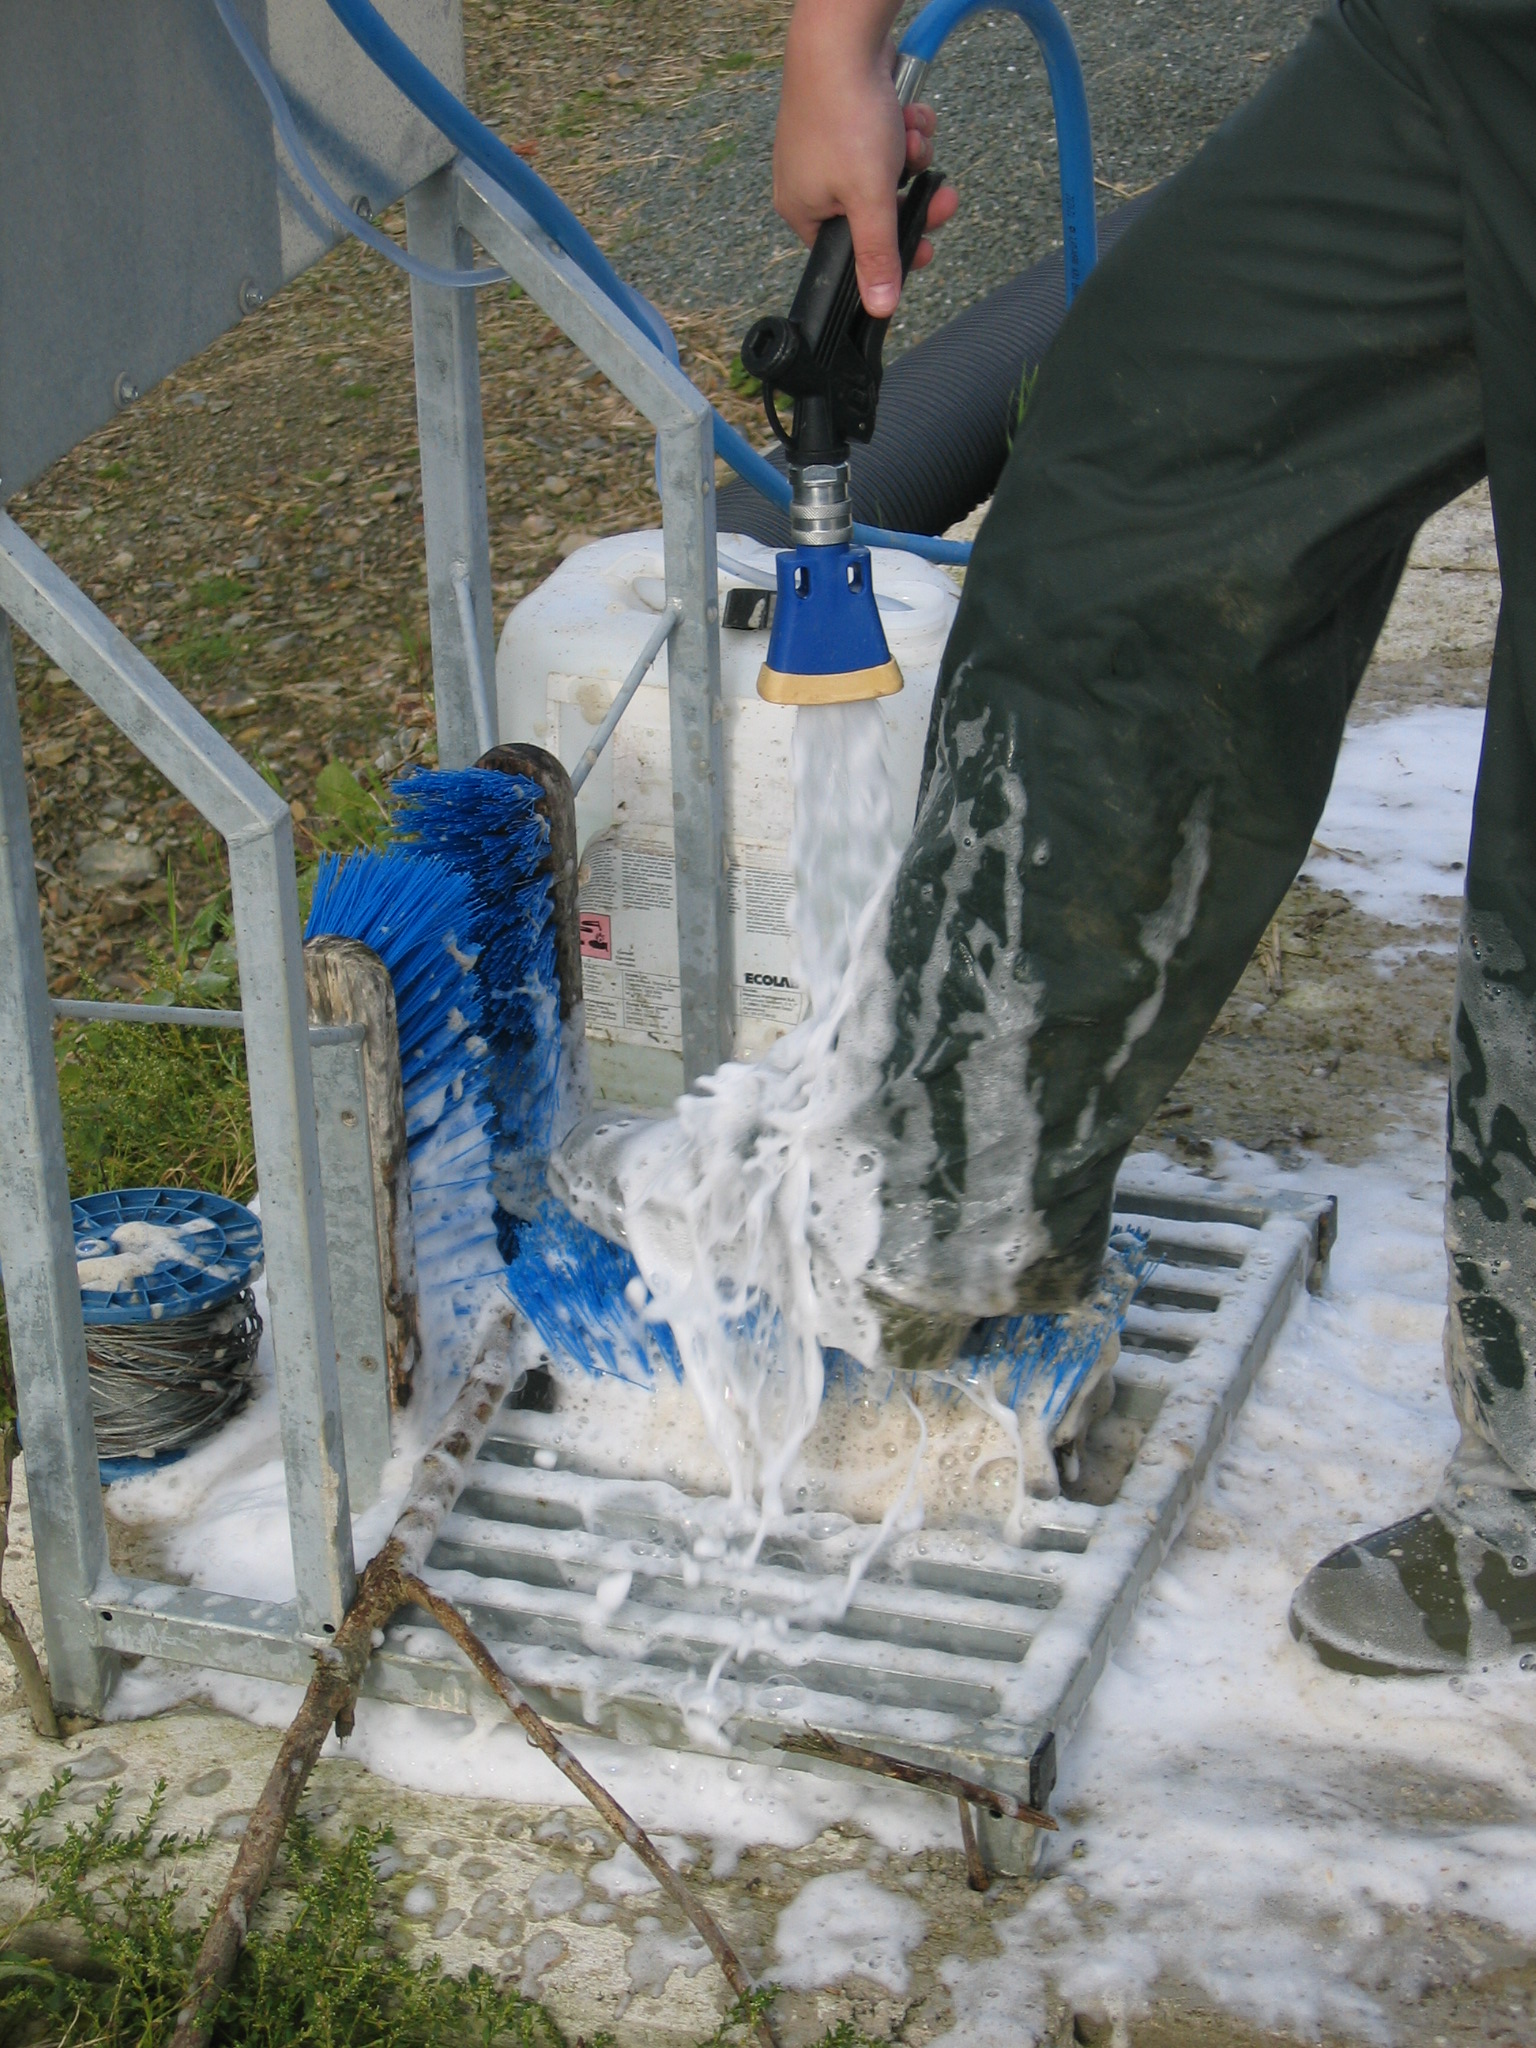 A person using a boot wash containing a spray hose providing disinfectant, brushes and a drain.